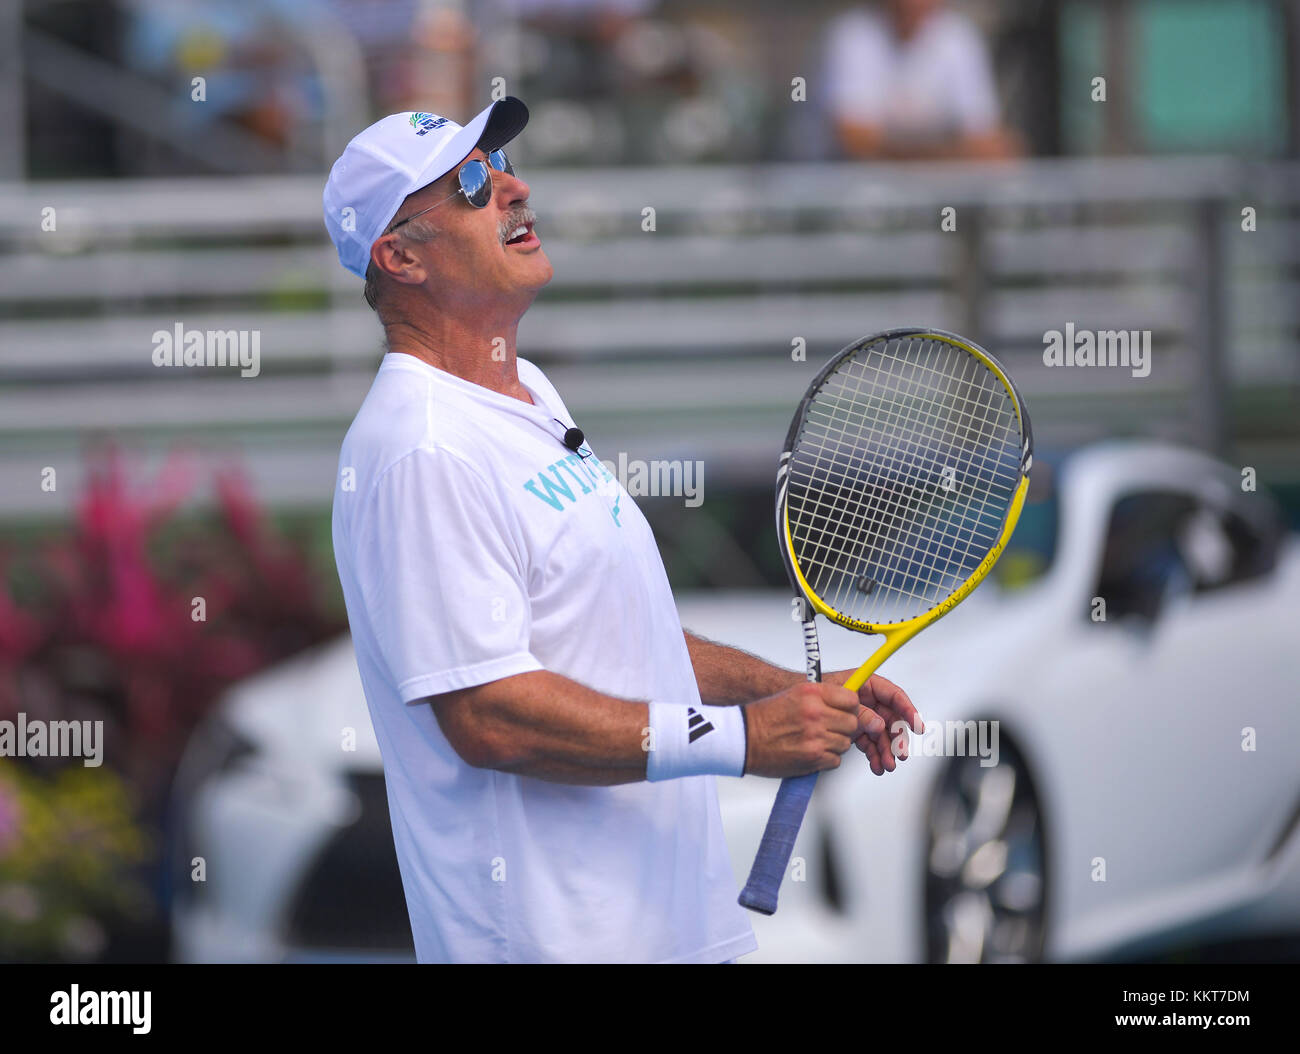 DELRAY BEACH, FL - NOVEMBER 04:  Dr. Phil McGraw participates in the 28th Annual Chris Evert/Raymond James Pro-Celebrity Tennis Classic at Delray Beach Tennis Center on November 4, 2017 in Delray Beach, Florida.  People:  Dr. Phil McGraw Stock Photo